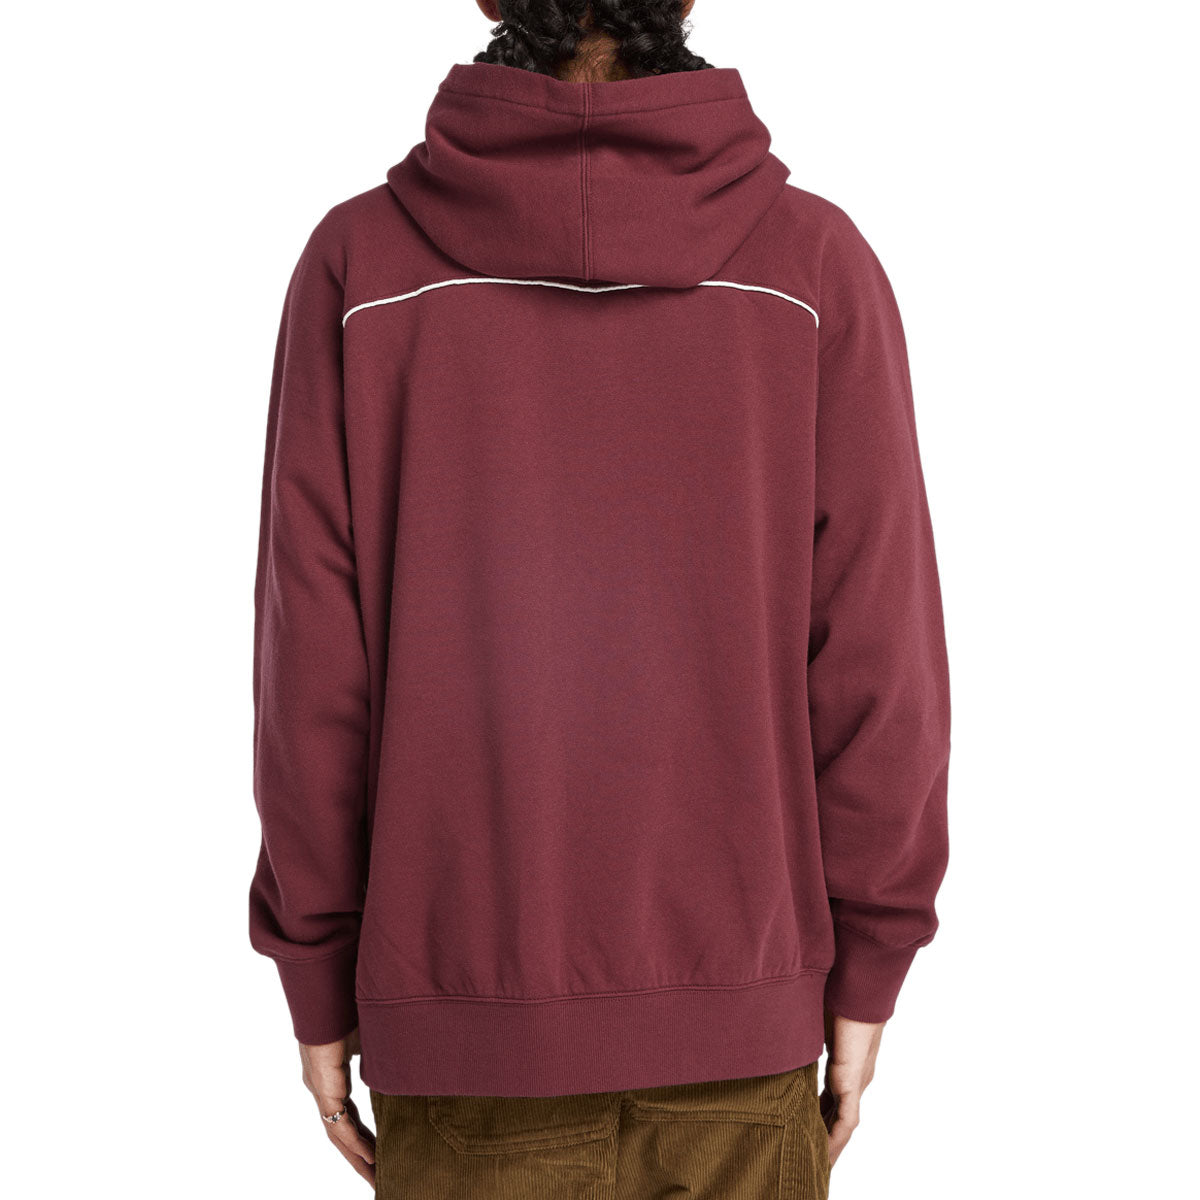 Timberland Oval Logo Patch Hoodie - Port Royale image 2